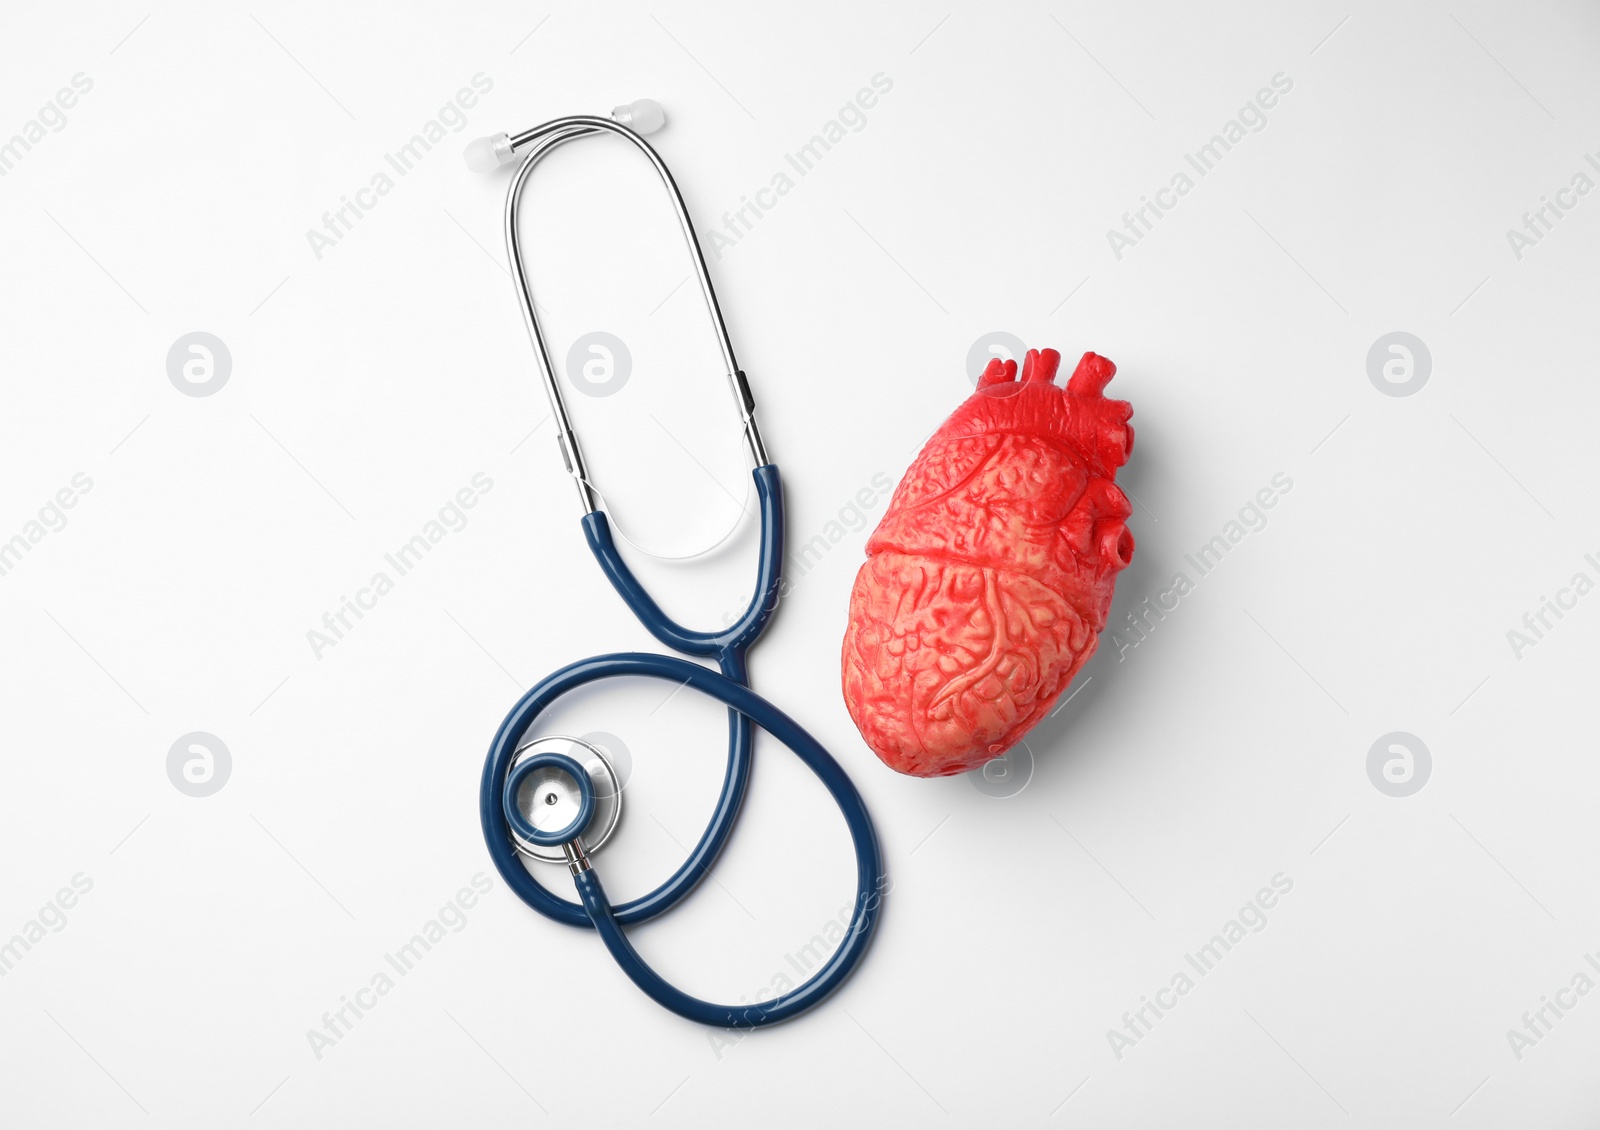 Photo of Stethoscope for checking pulse and heart model on white background, top view